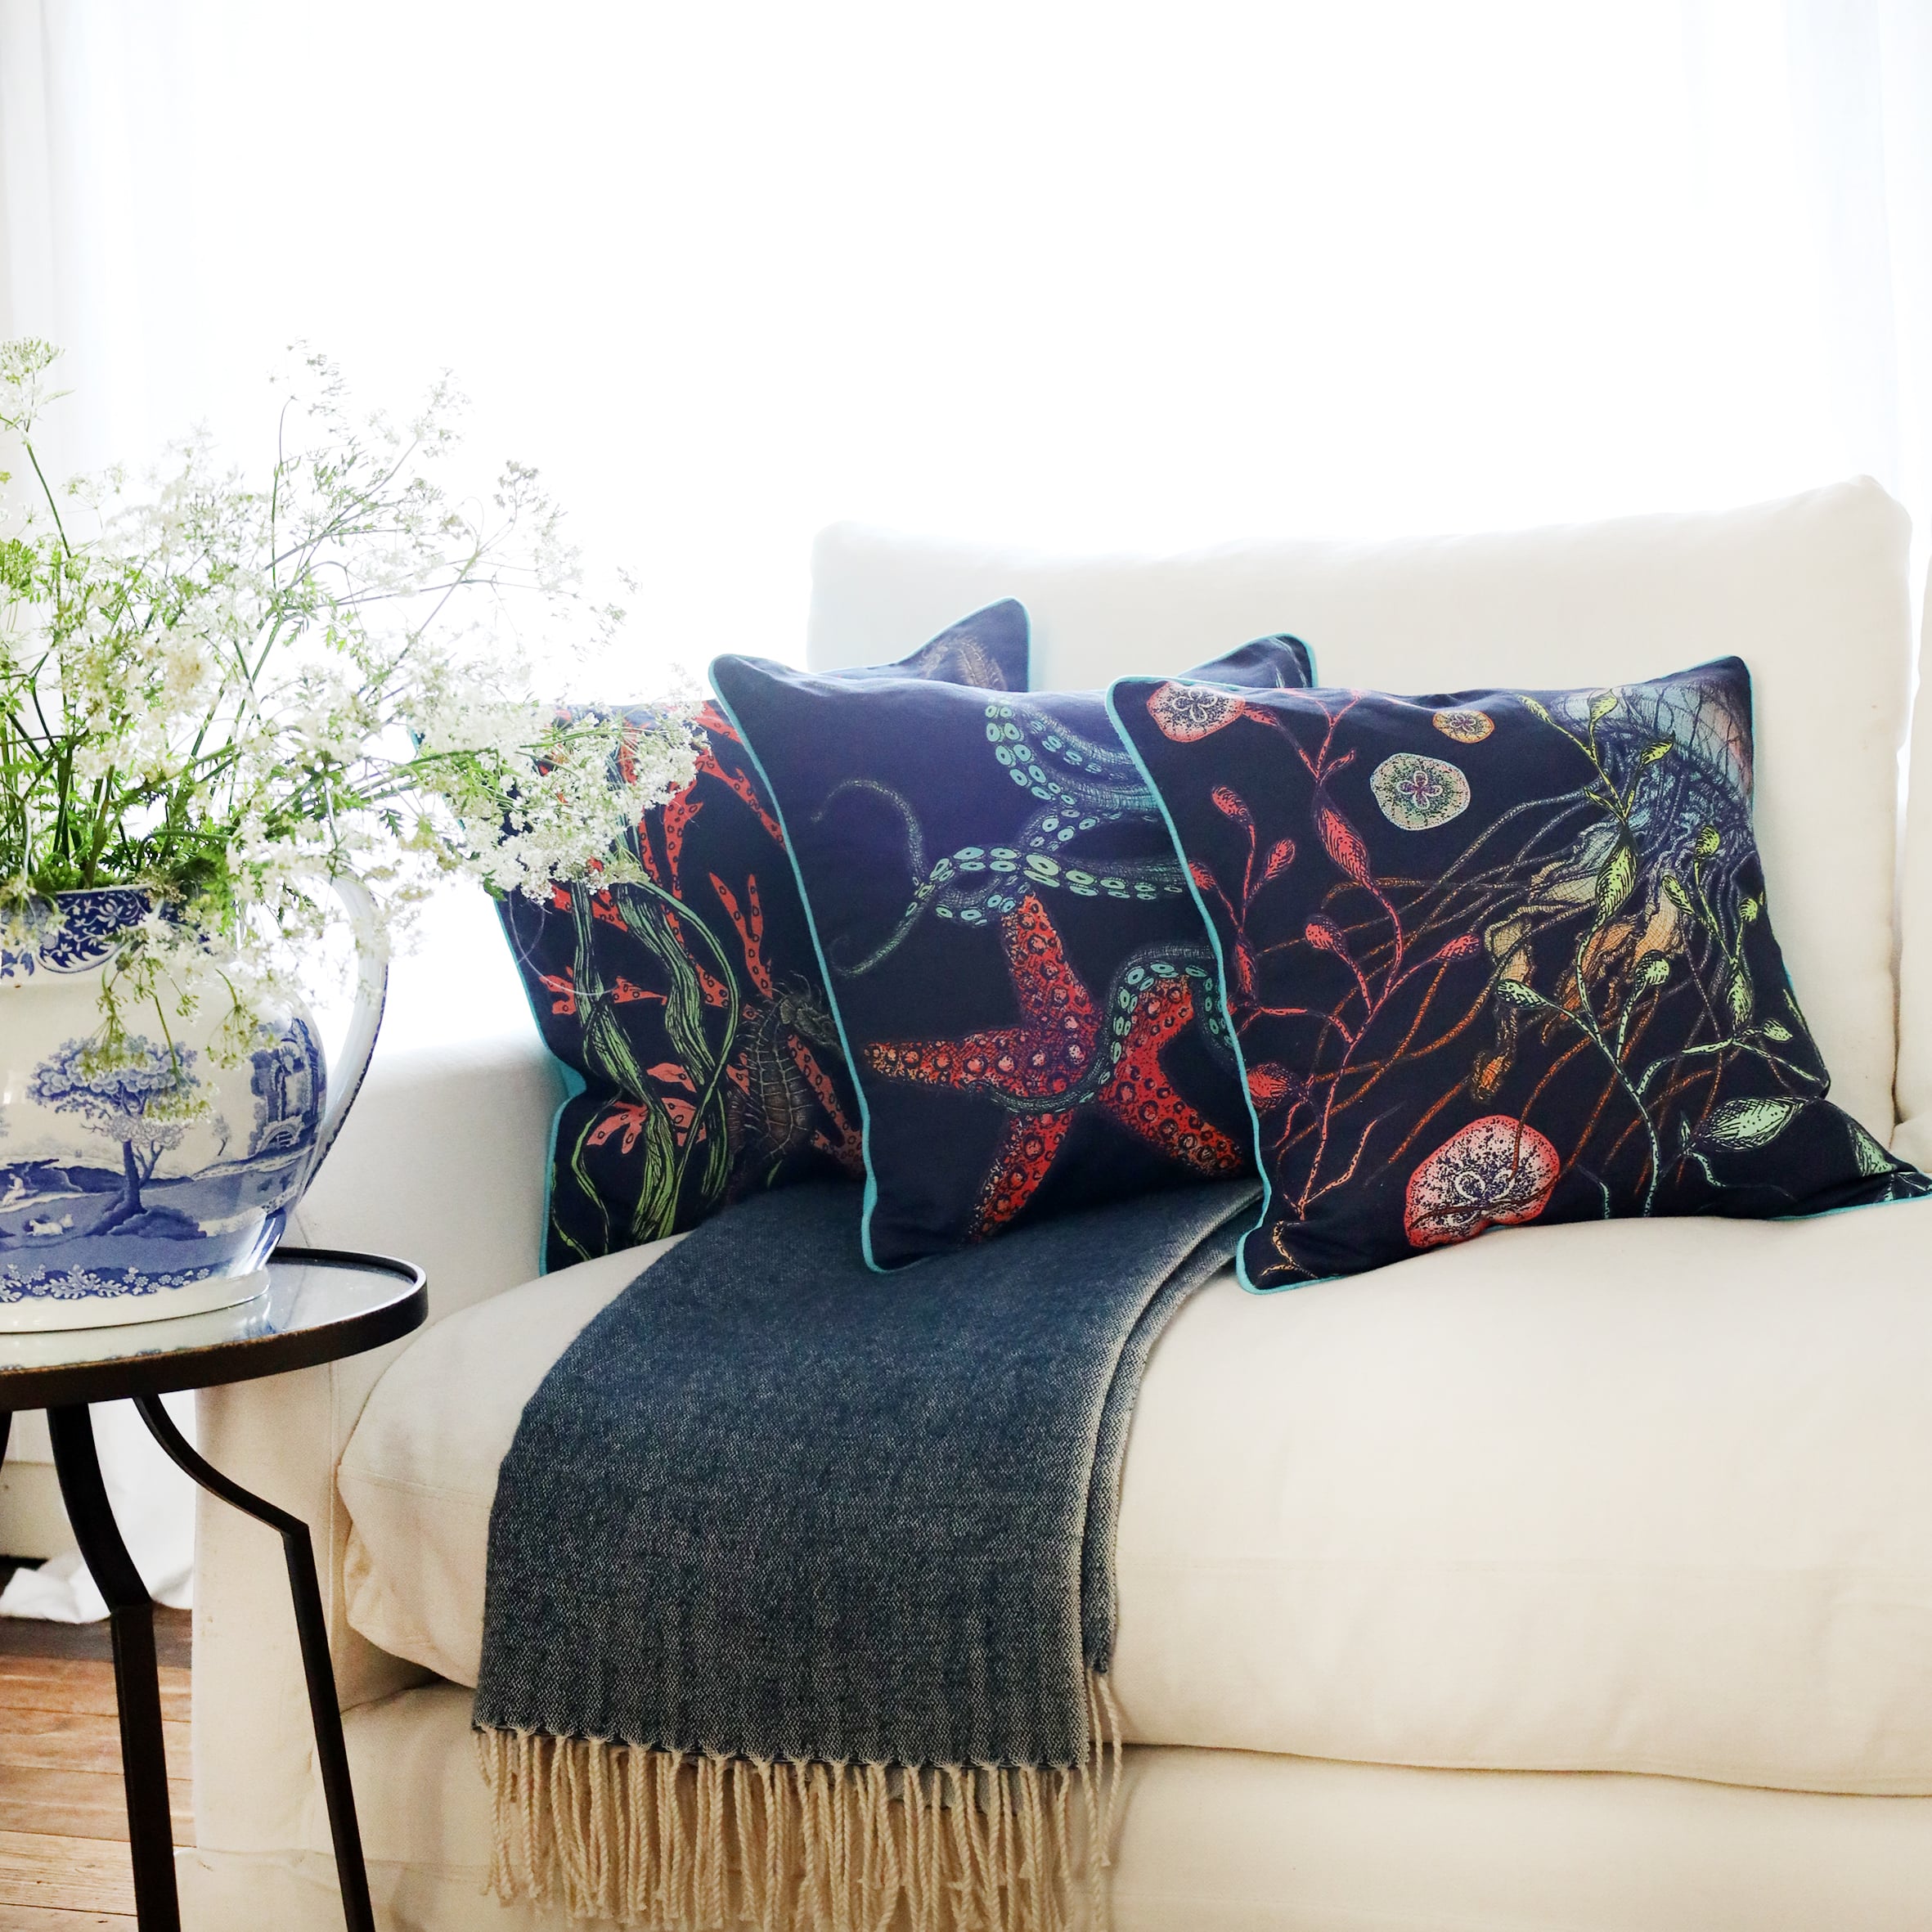 3 cushions an a white sofa with brightly coloured sea creatures illustrations on a navy ground with the sun streaming through the window at the back and a large willow pattern jug filled with cow parsley